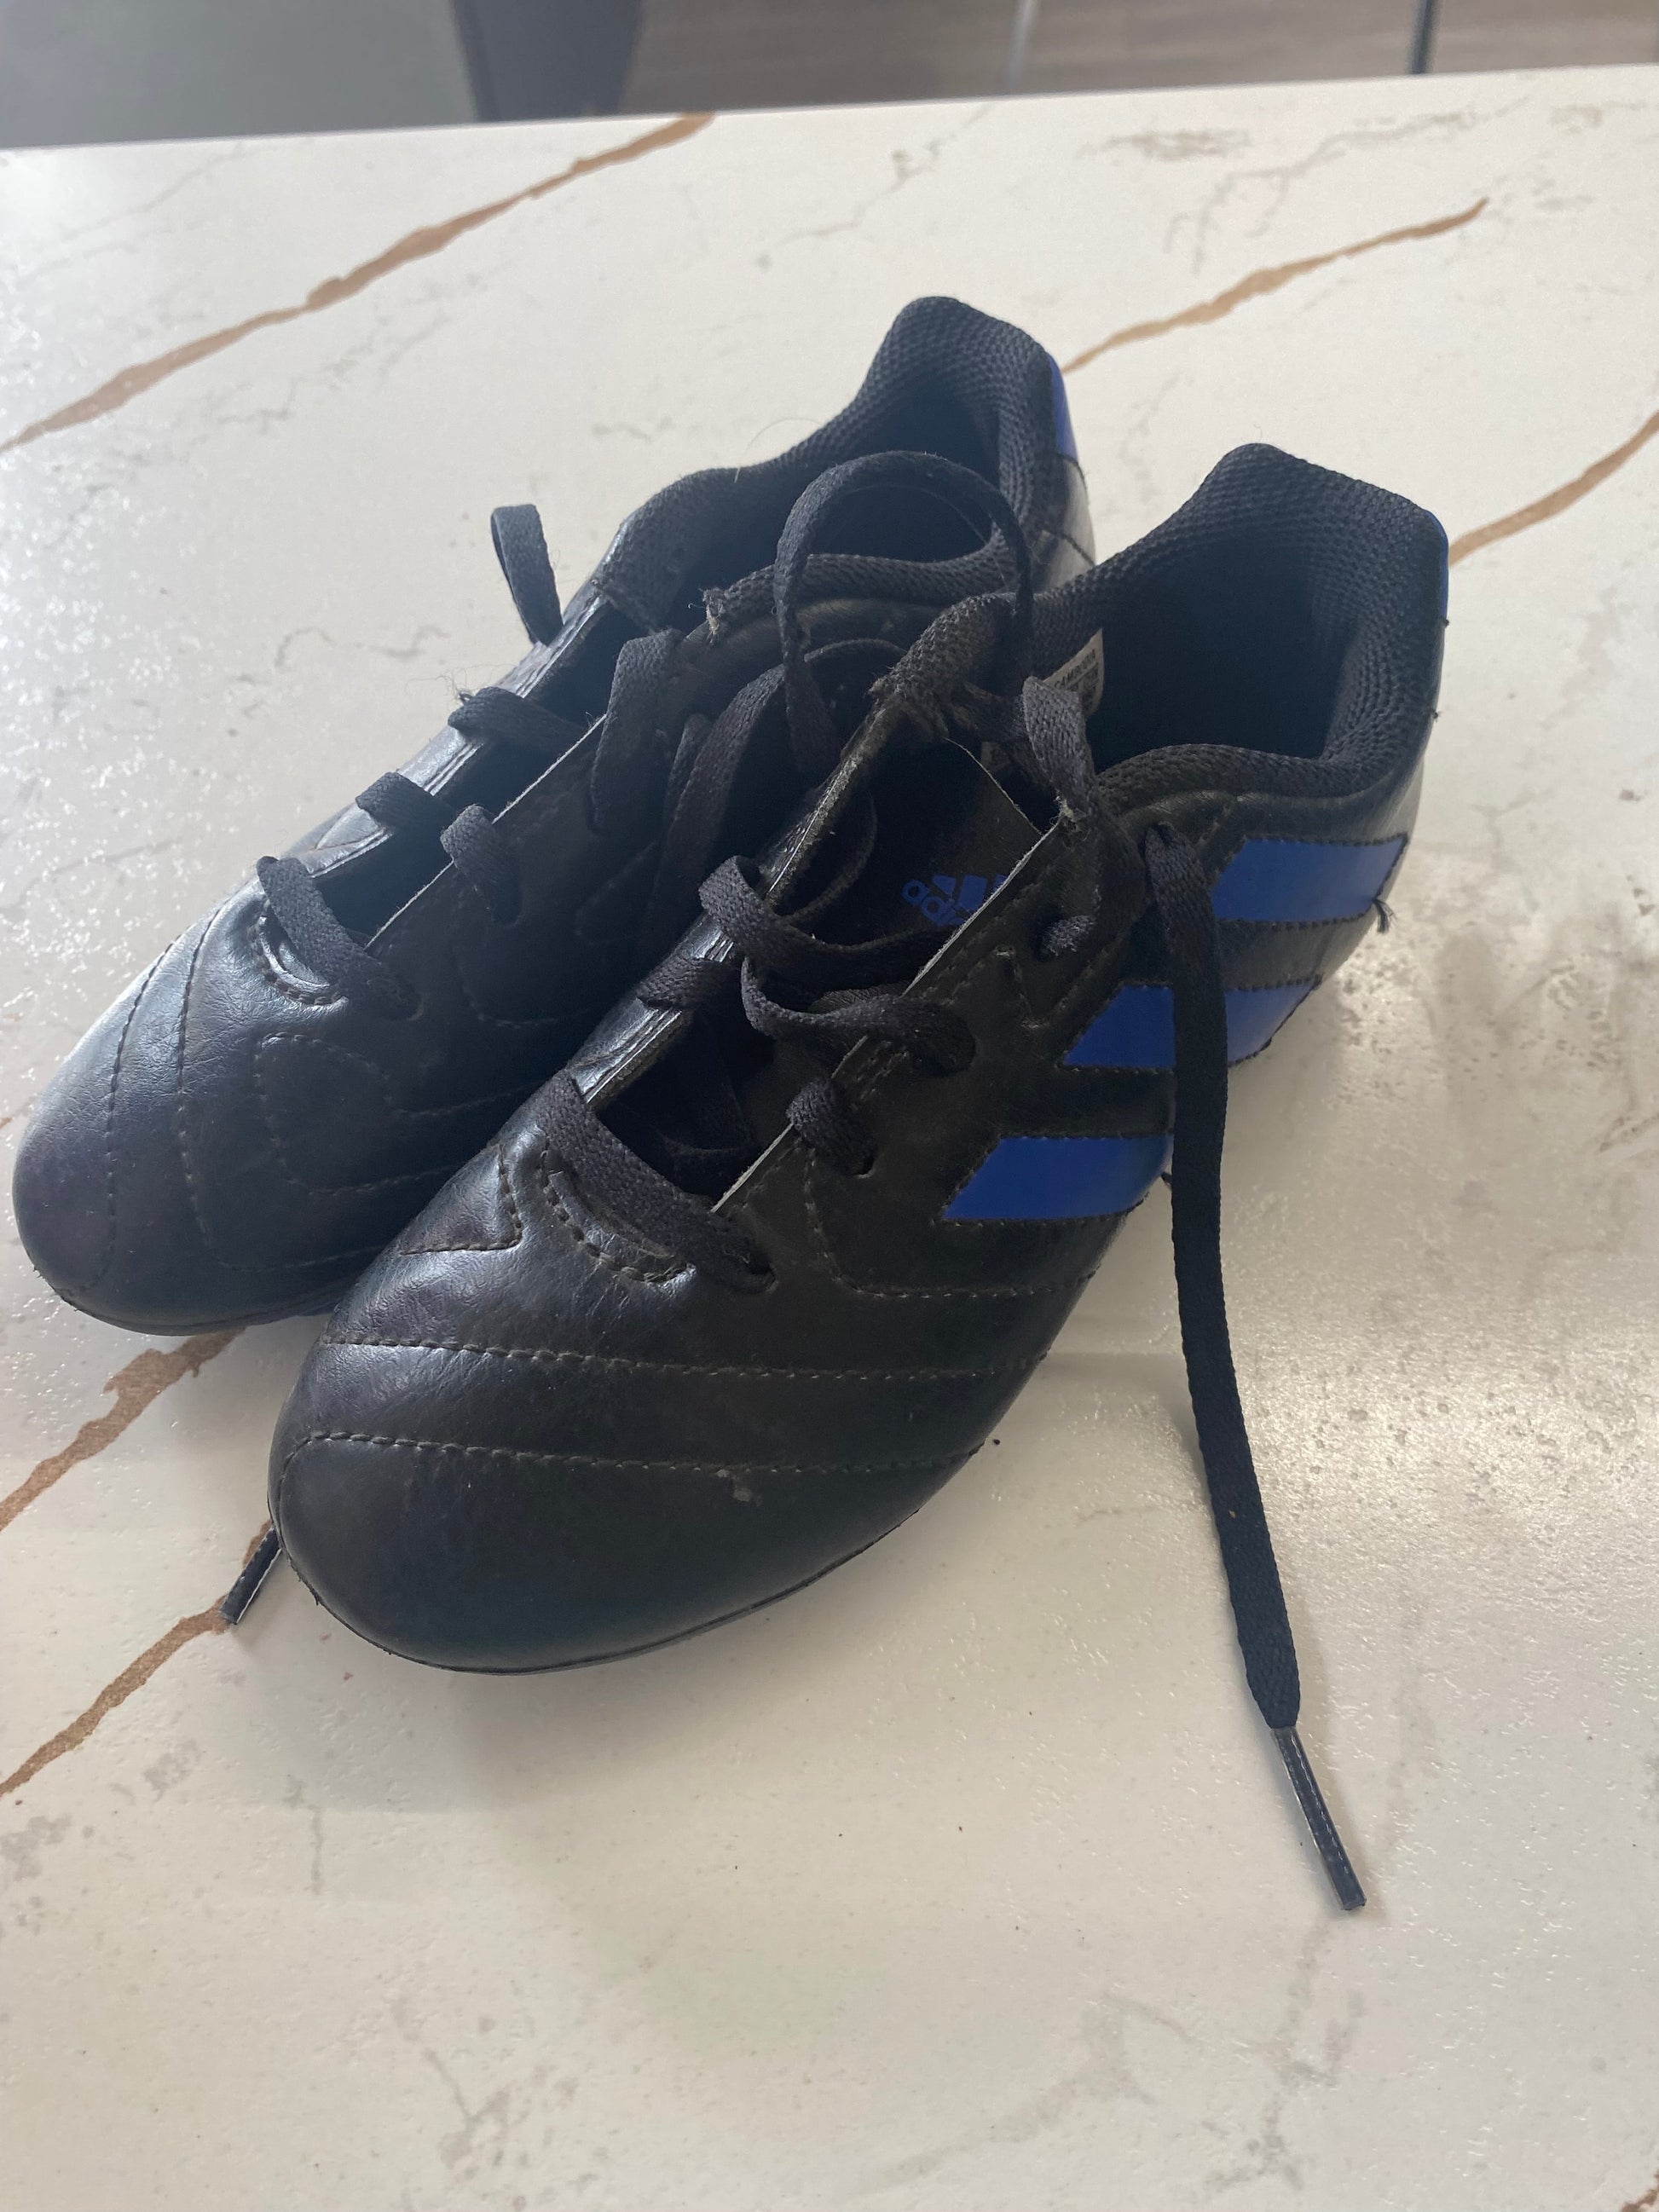 GUC Adidas Size 12 Black Soccer Cleats